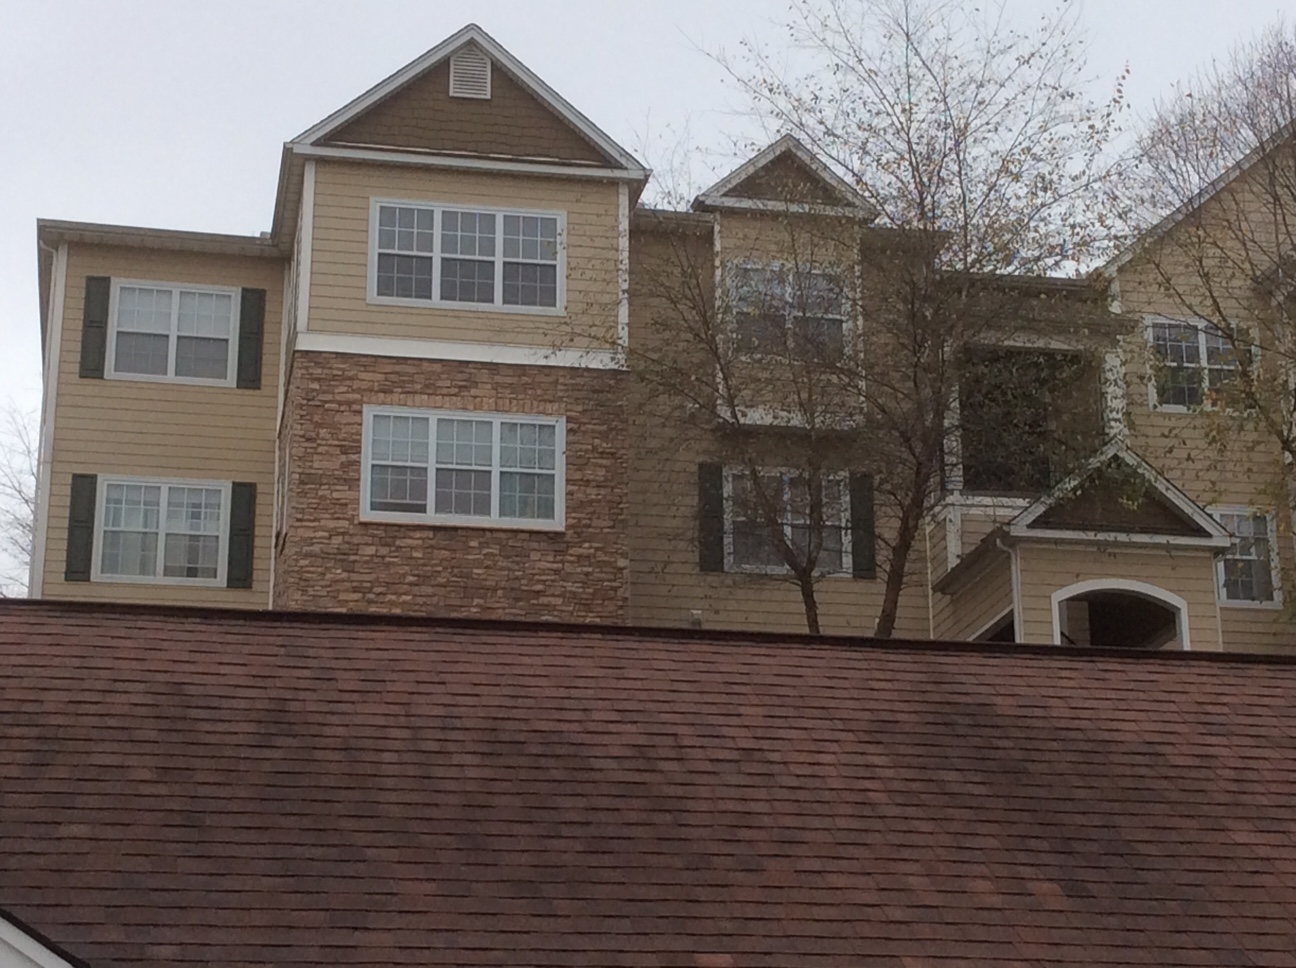 Apartment complex in Knoxville that is needing repairs including shingles, flashing and wood.